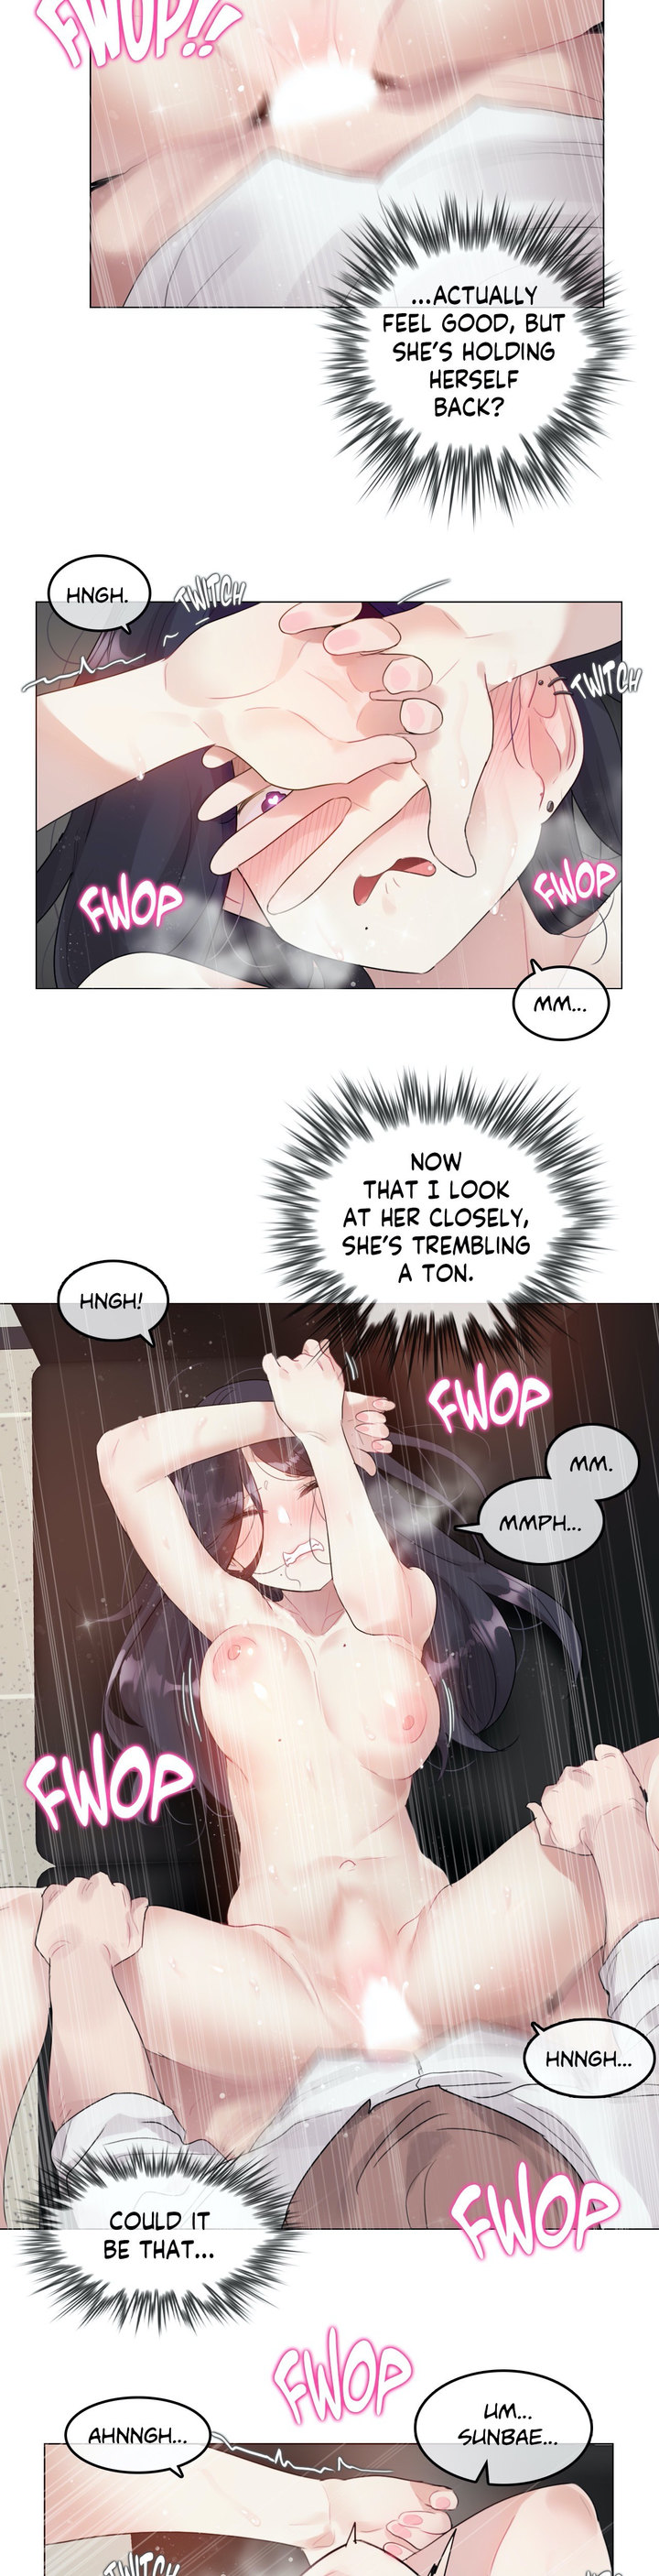 A Pervert’s Daily Life - Chapter 103 Page 2